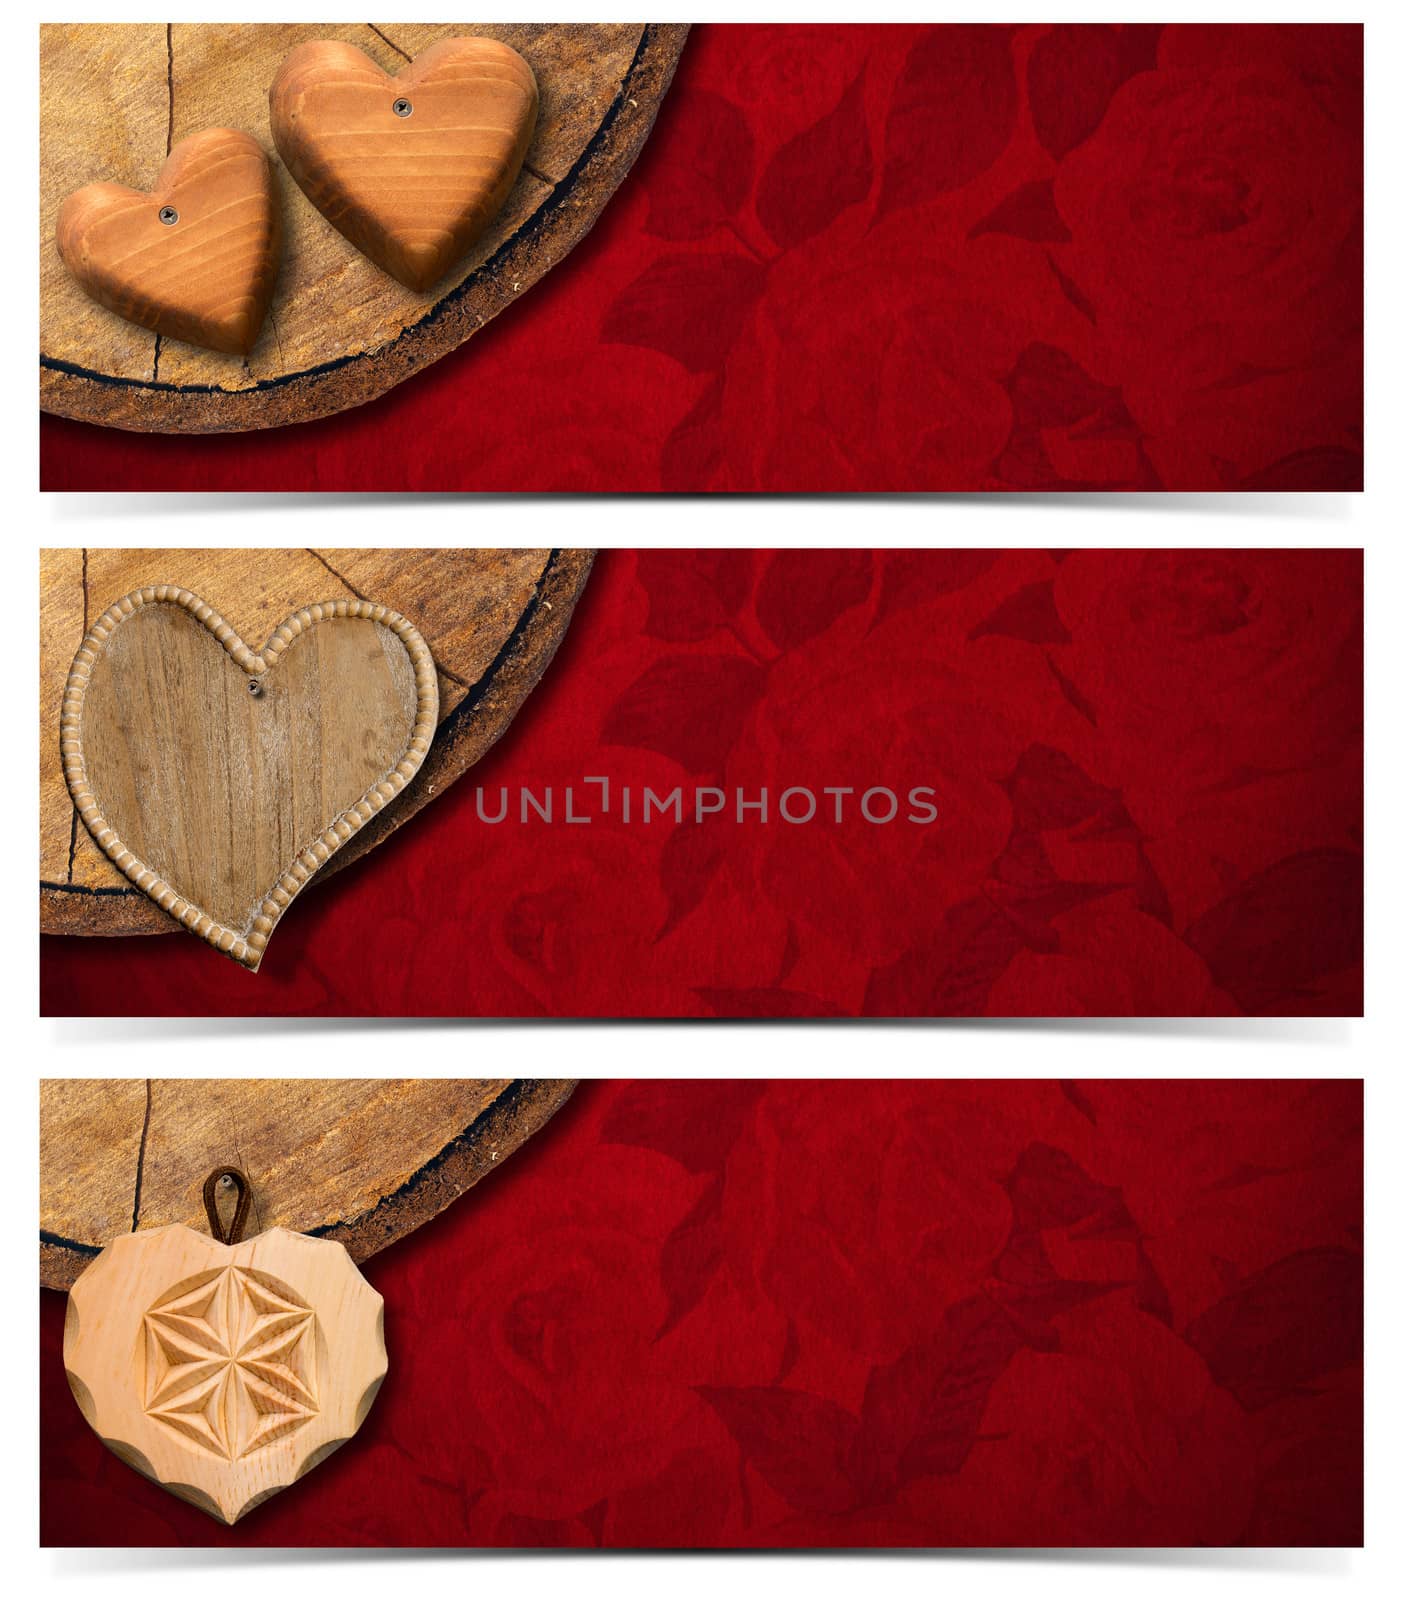 Handmade wooden hearts hanging from a section of tree trunk on red velvet background with roses flowers
